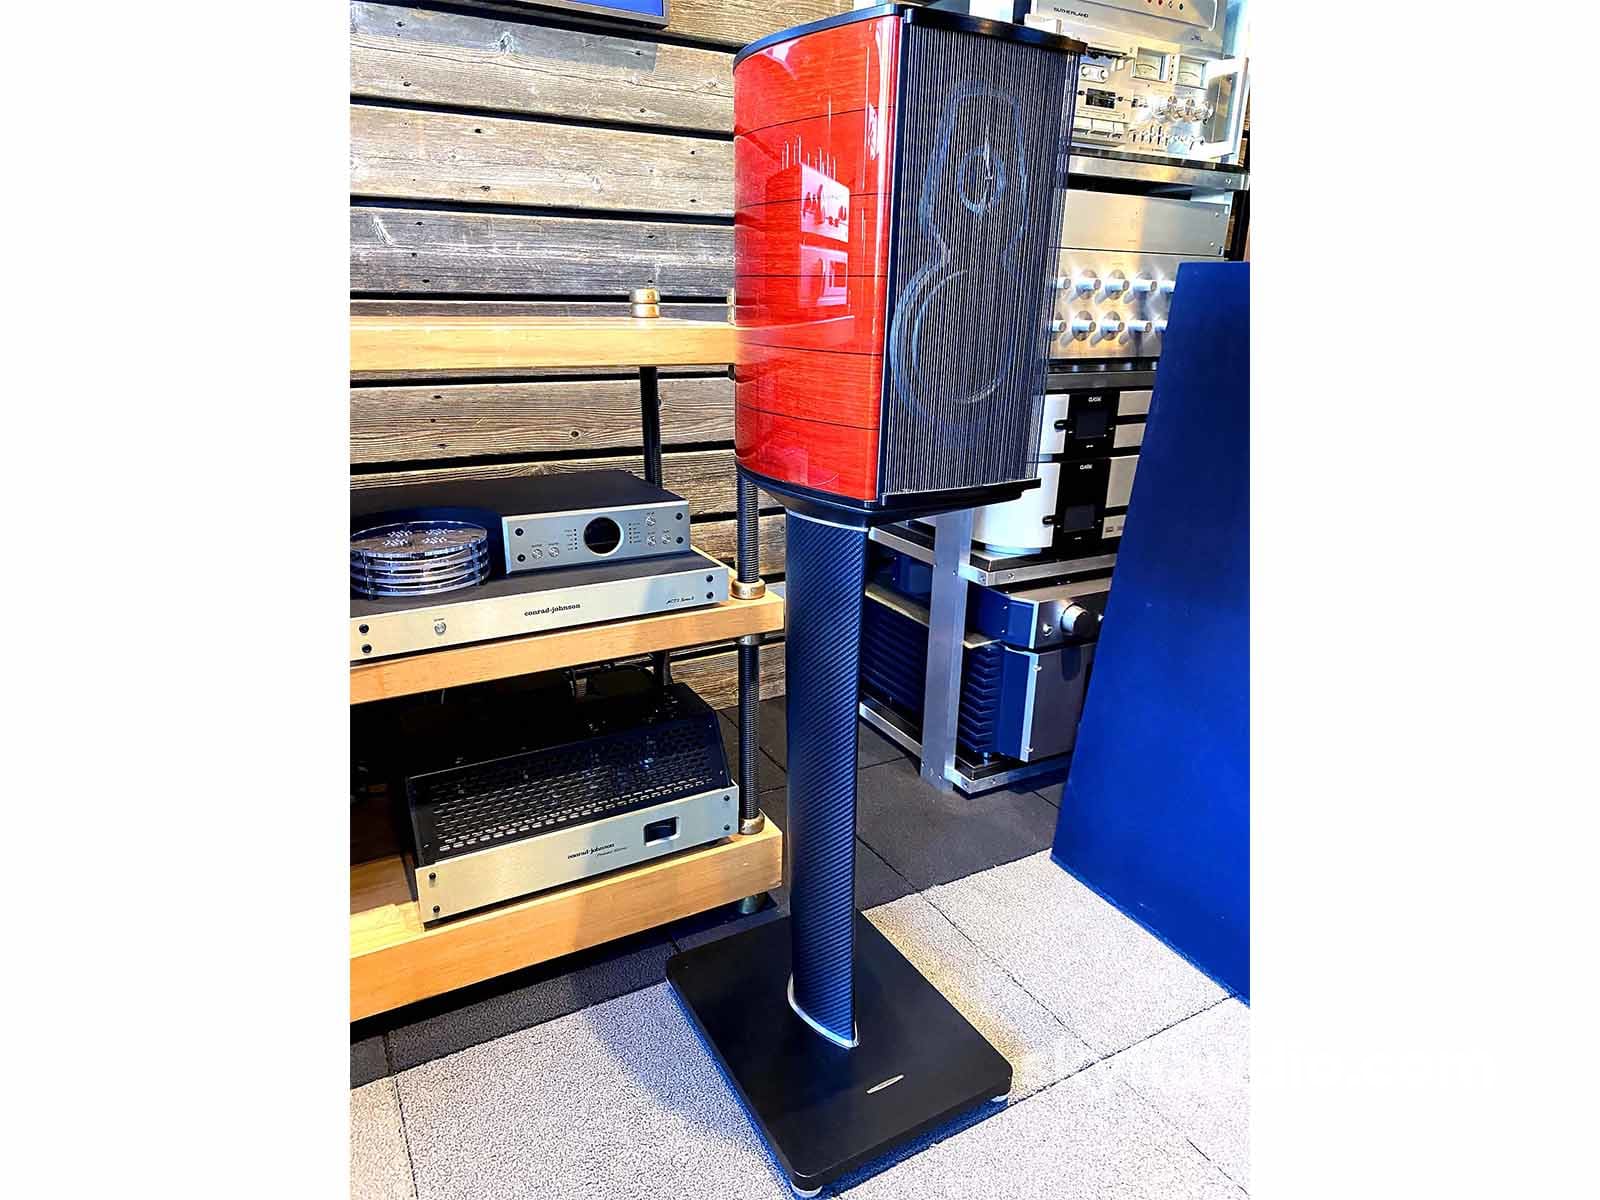 Sonus Faber Guarneri Tradition Speakers On Carbon Fiber Stands - In Store Purchase Only